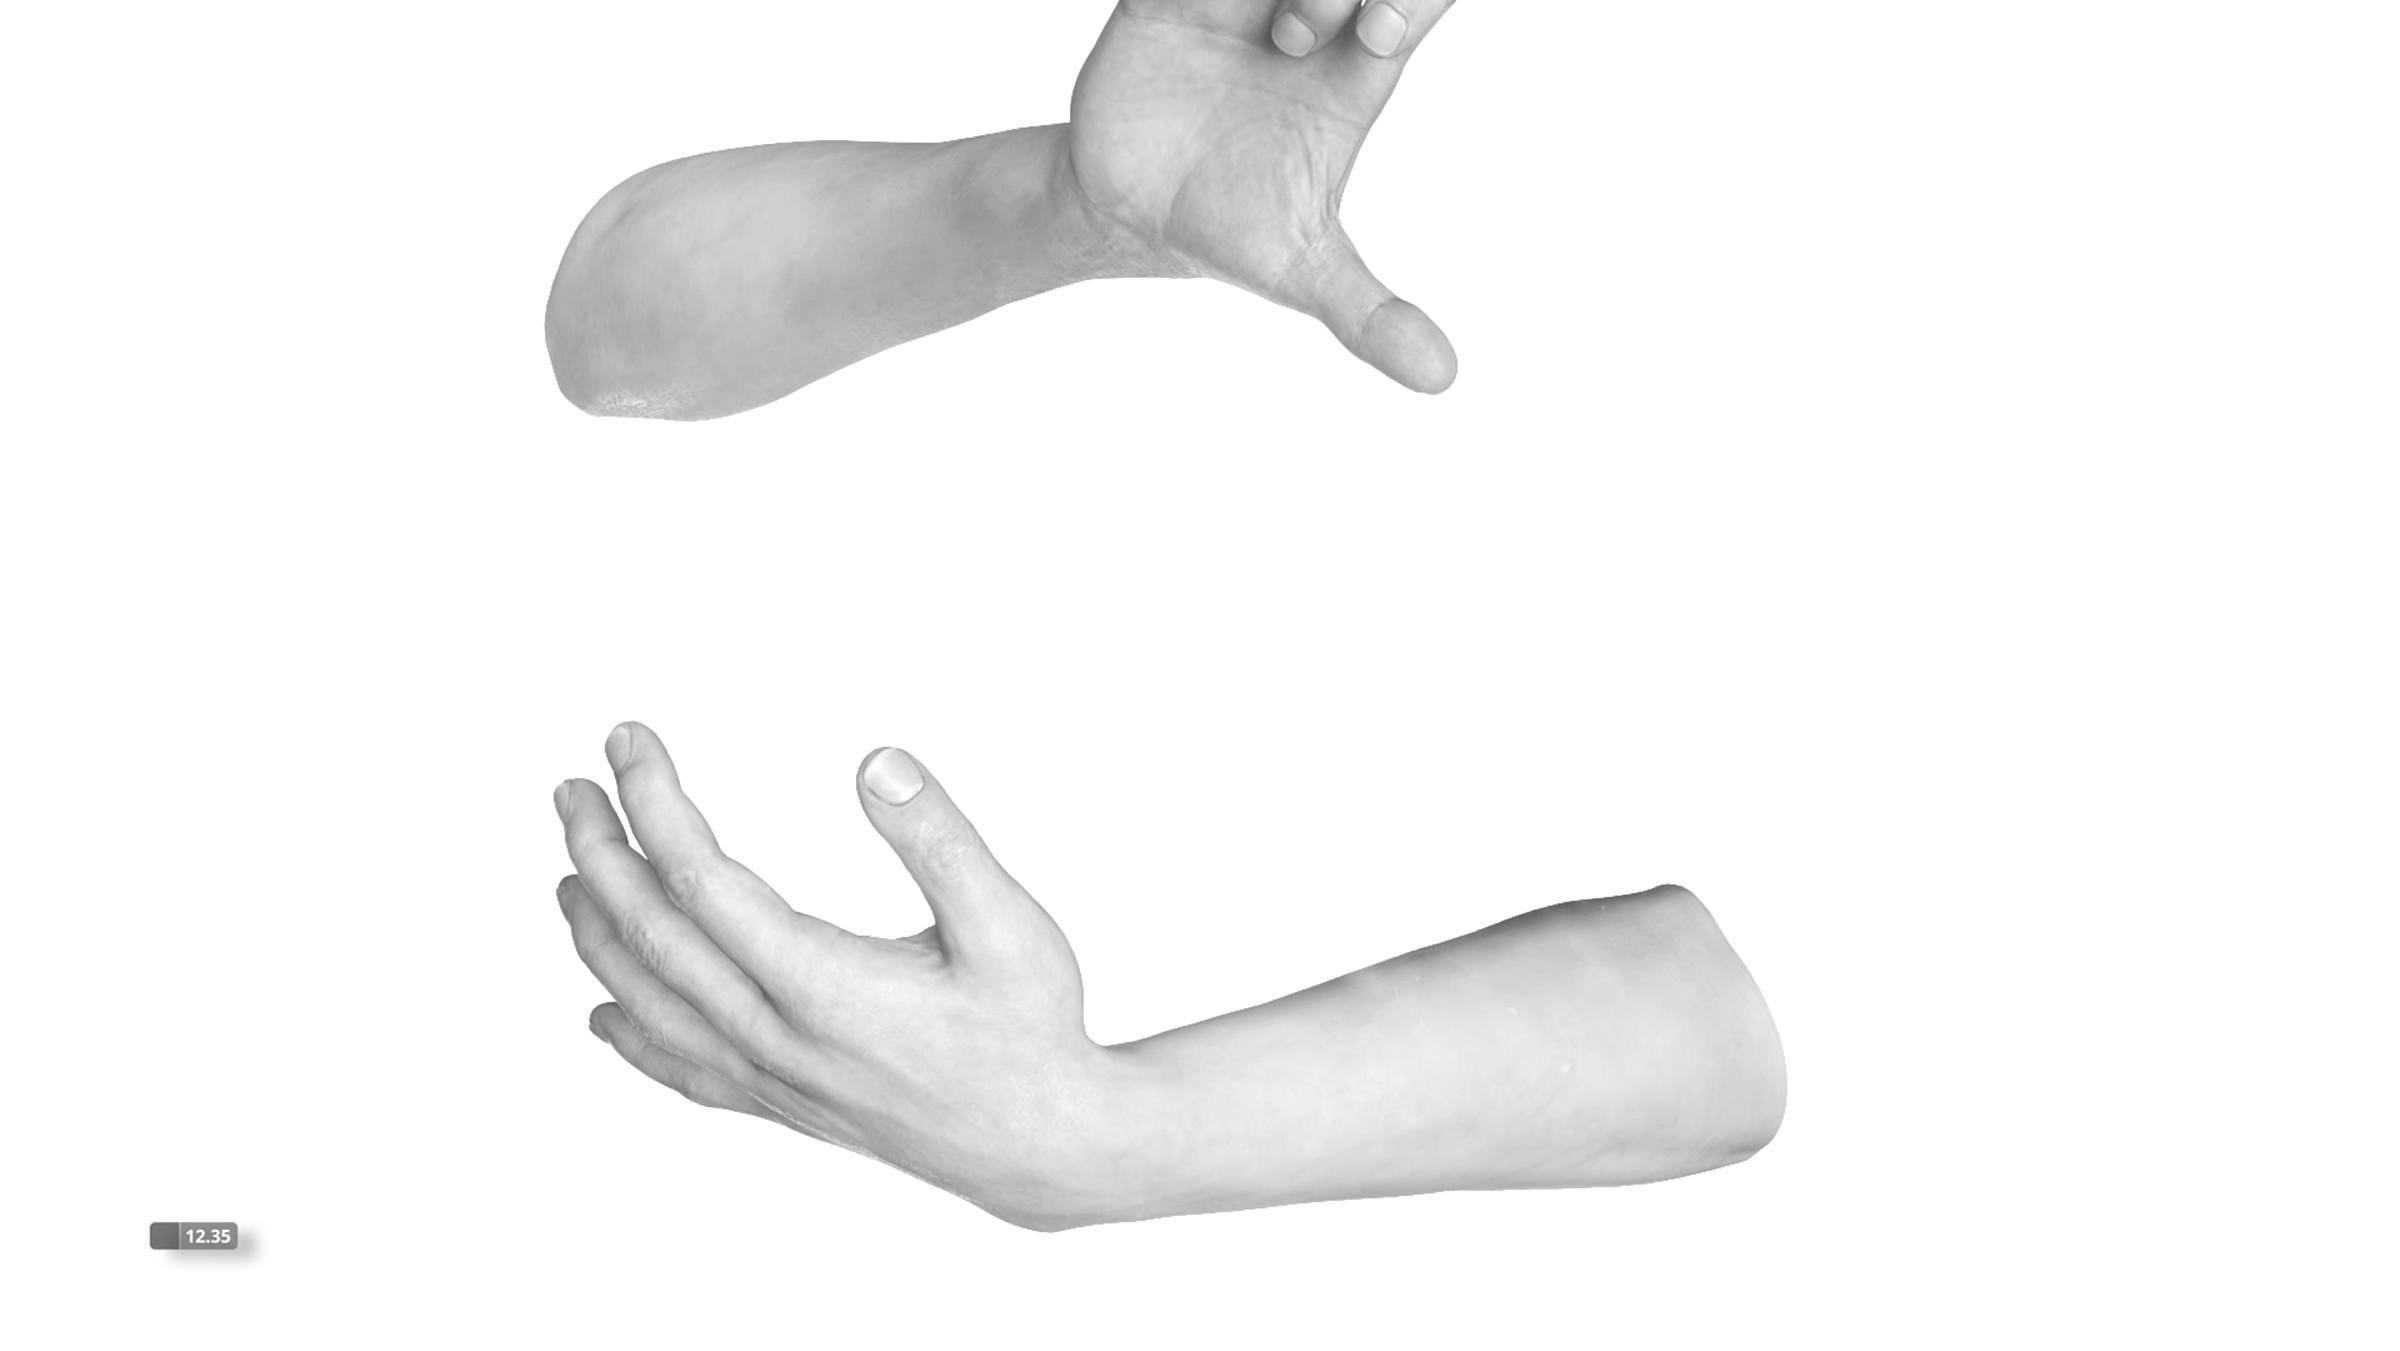 2 disembodied arms and hands float in white space